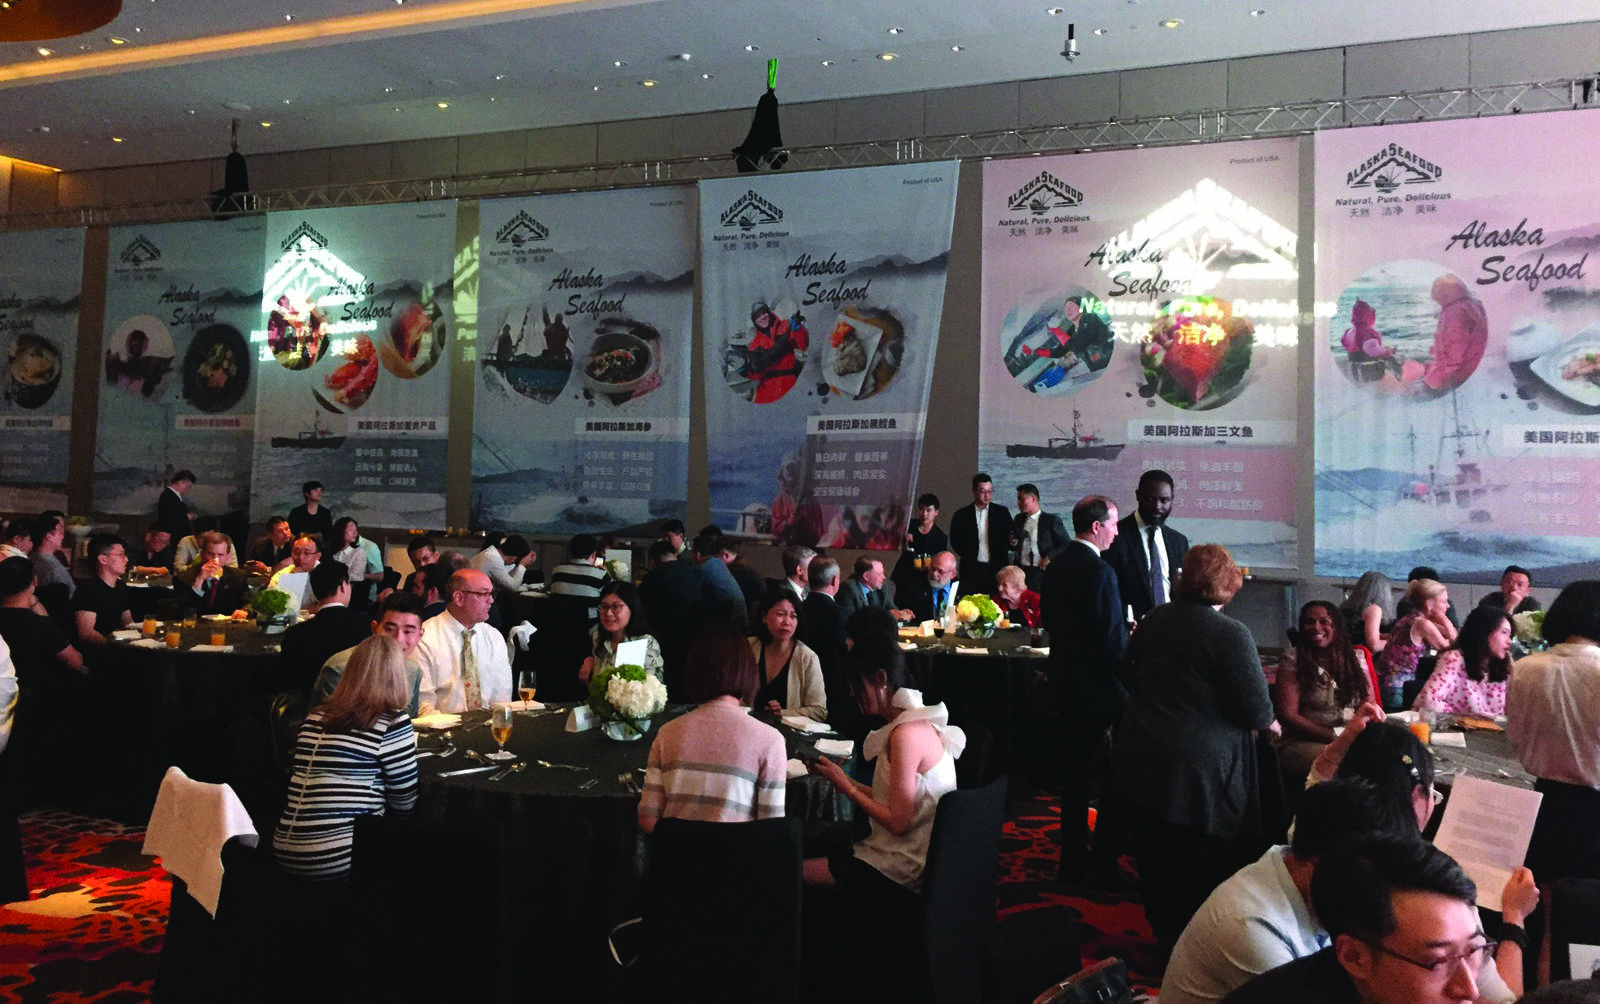 The Alaska Seafood Marketing Institute put on a tasting event for buyers and food media writers during the recent trade trip to China organized by Gov. Bill Walker. (Photo/Courtesy/Anchorage Economic Development Corp.)